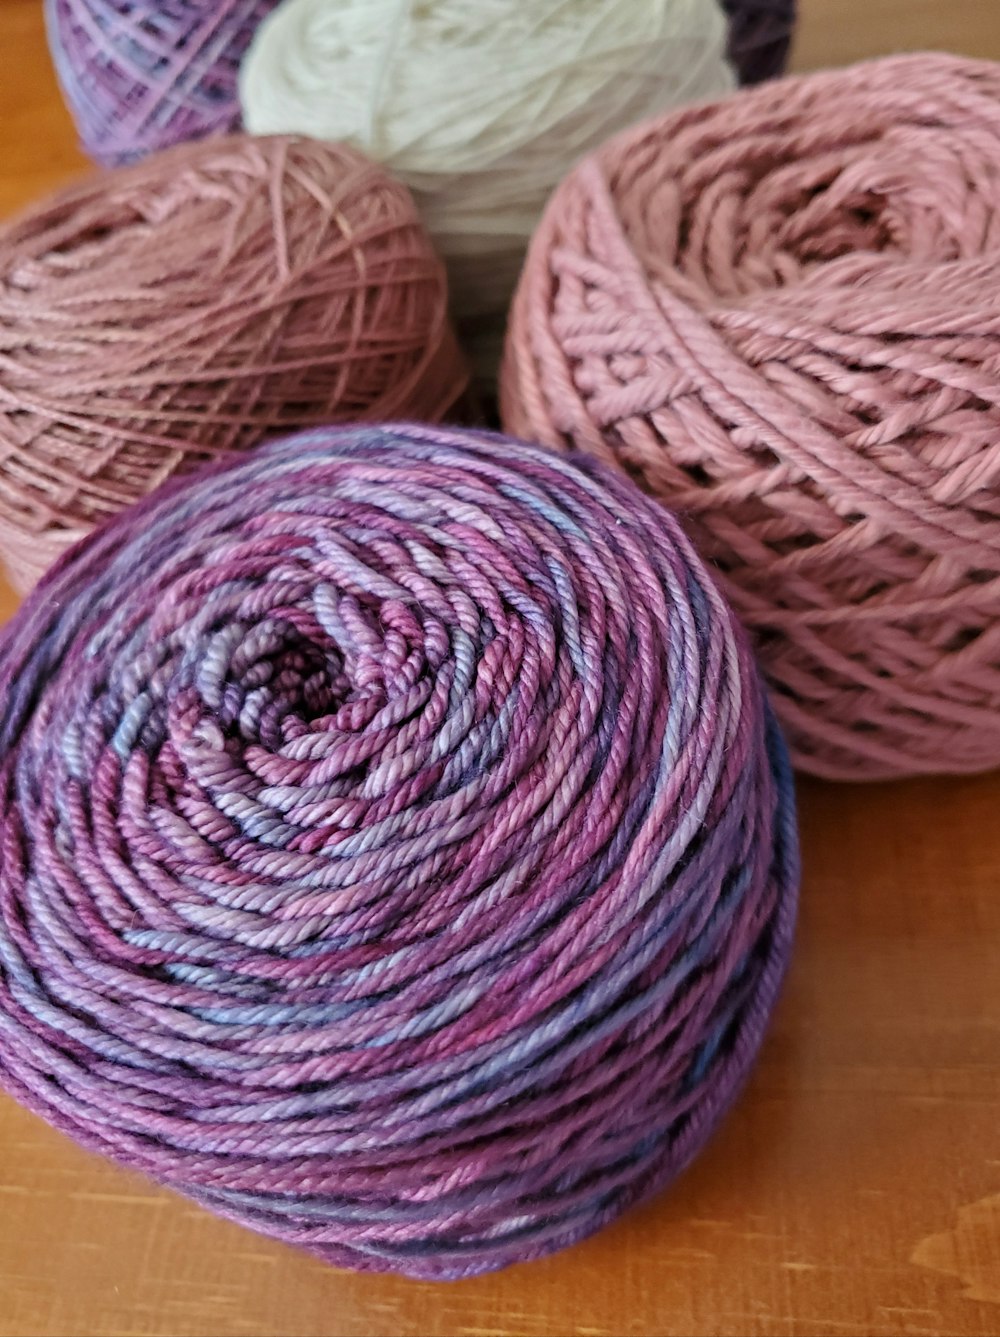 three skeins of yarn sitting on a table